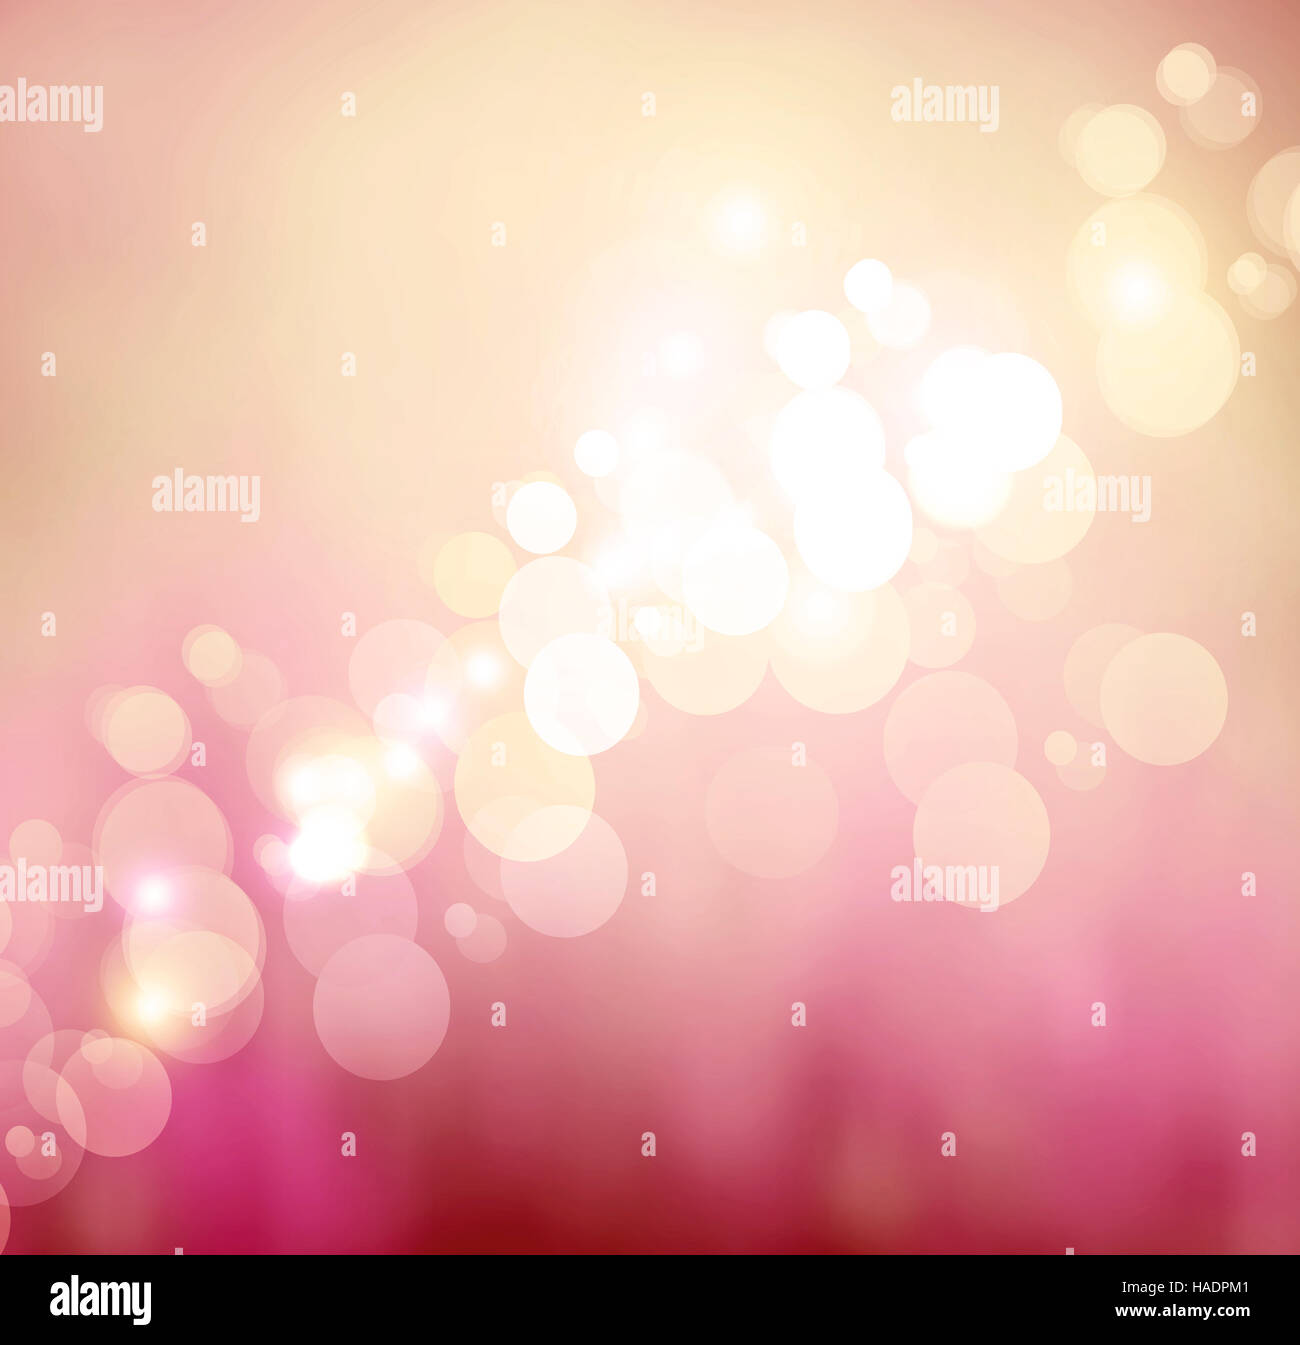 Light Festive Background With Shine And Twinkle Stock Photo